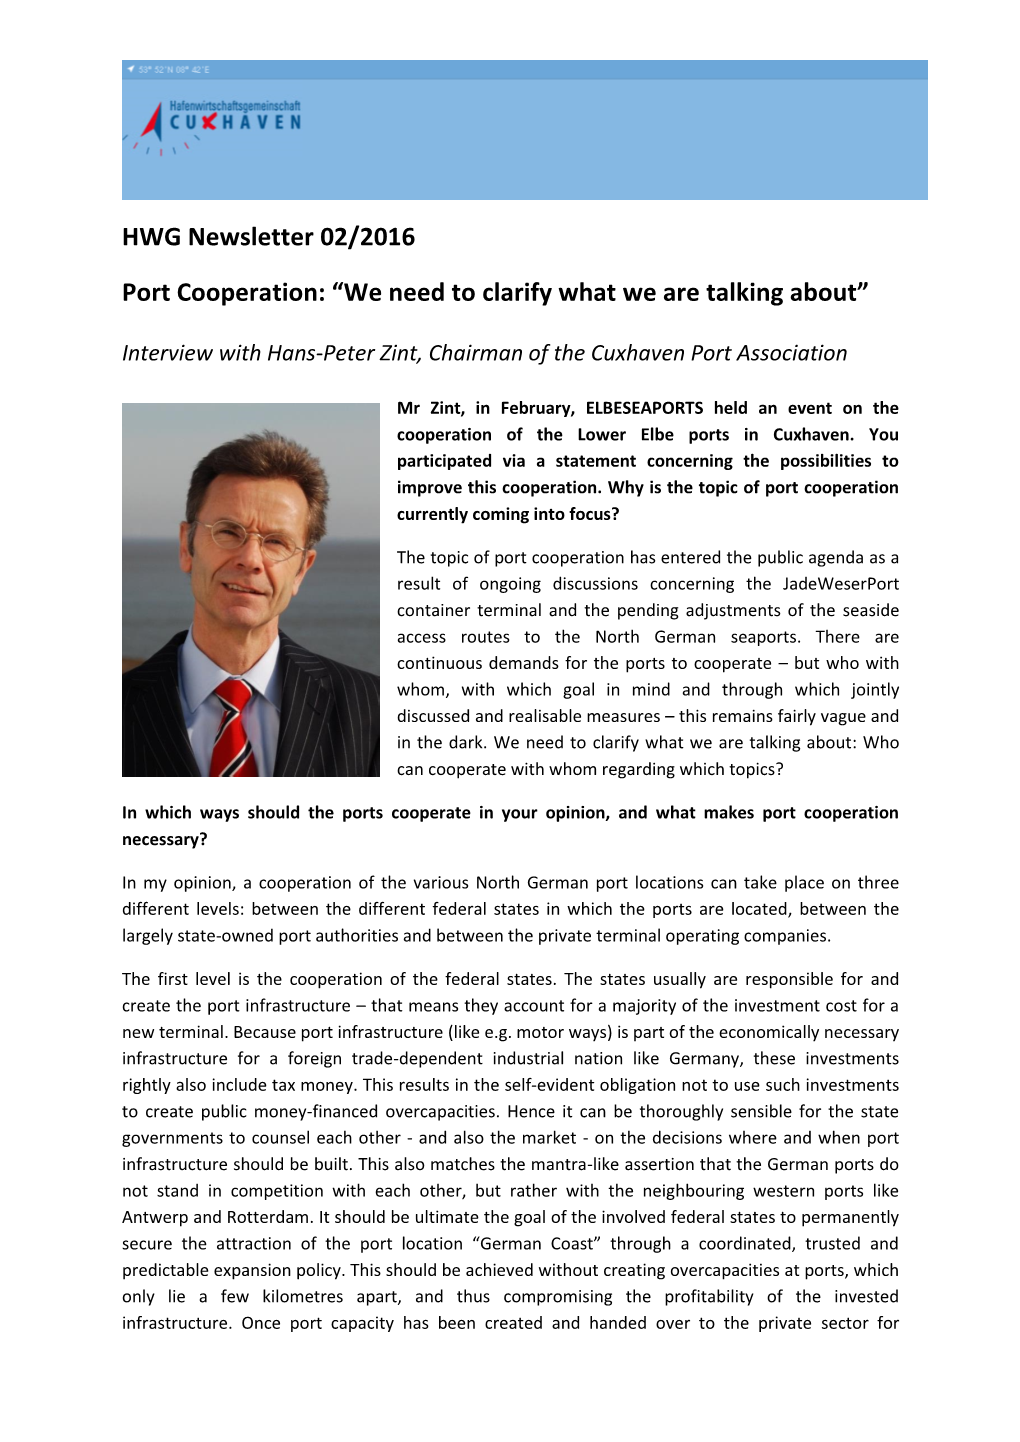 HWG Newsletter 02/2016 Port Cooperation: “We Need to Clarify